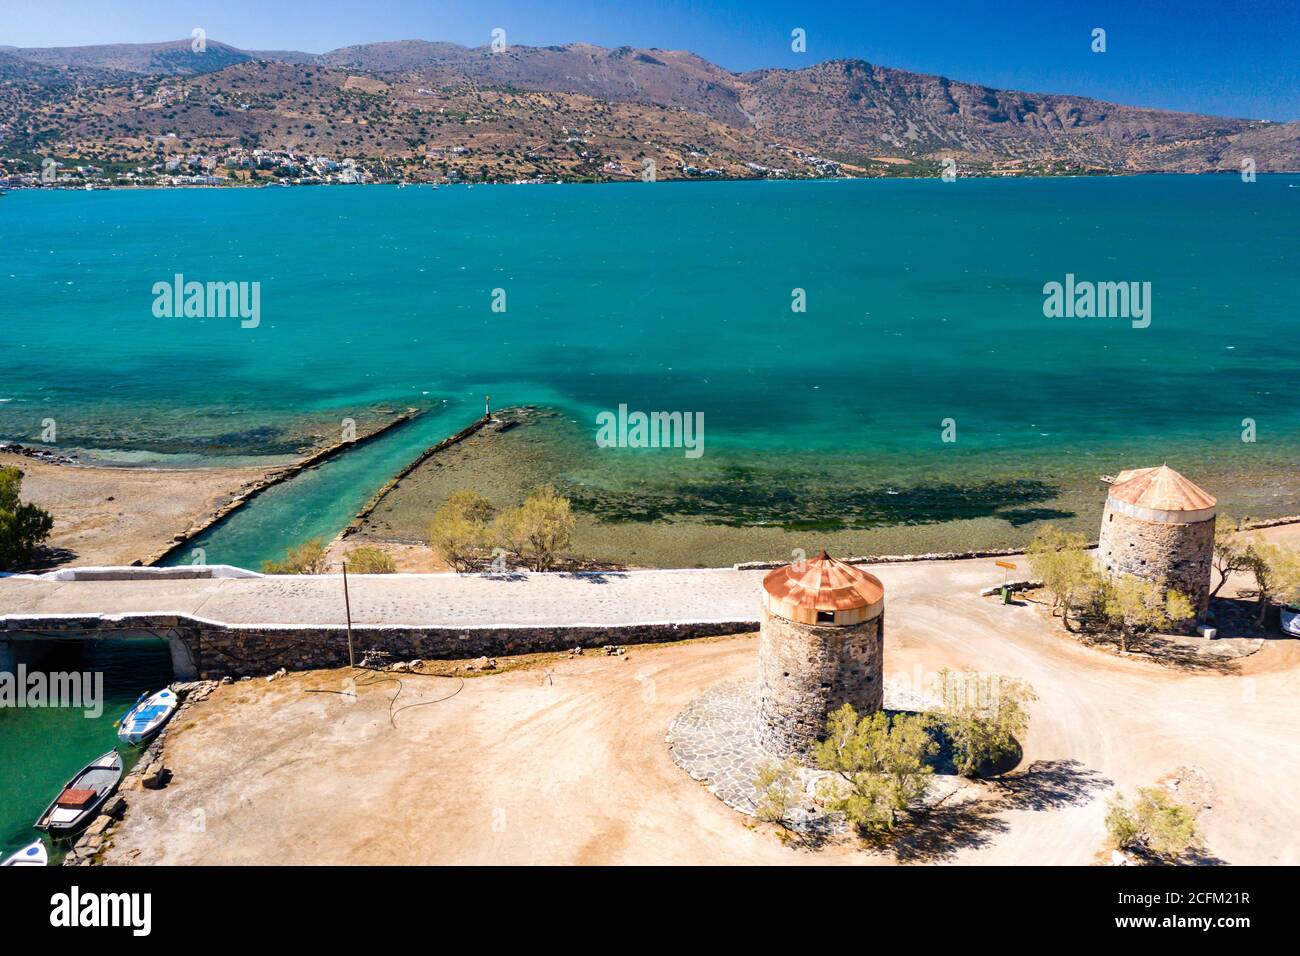 Old windmills and canal on a narrow causeway and site of an ancient Minoan city (Elounda, Crete, Greece) Stock Photo